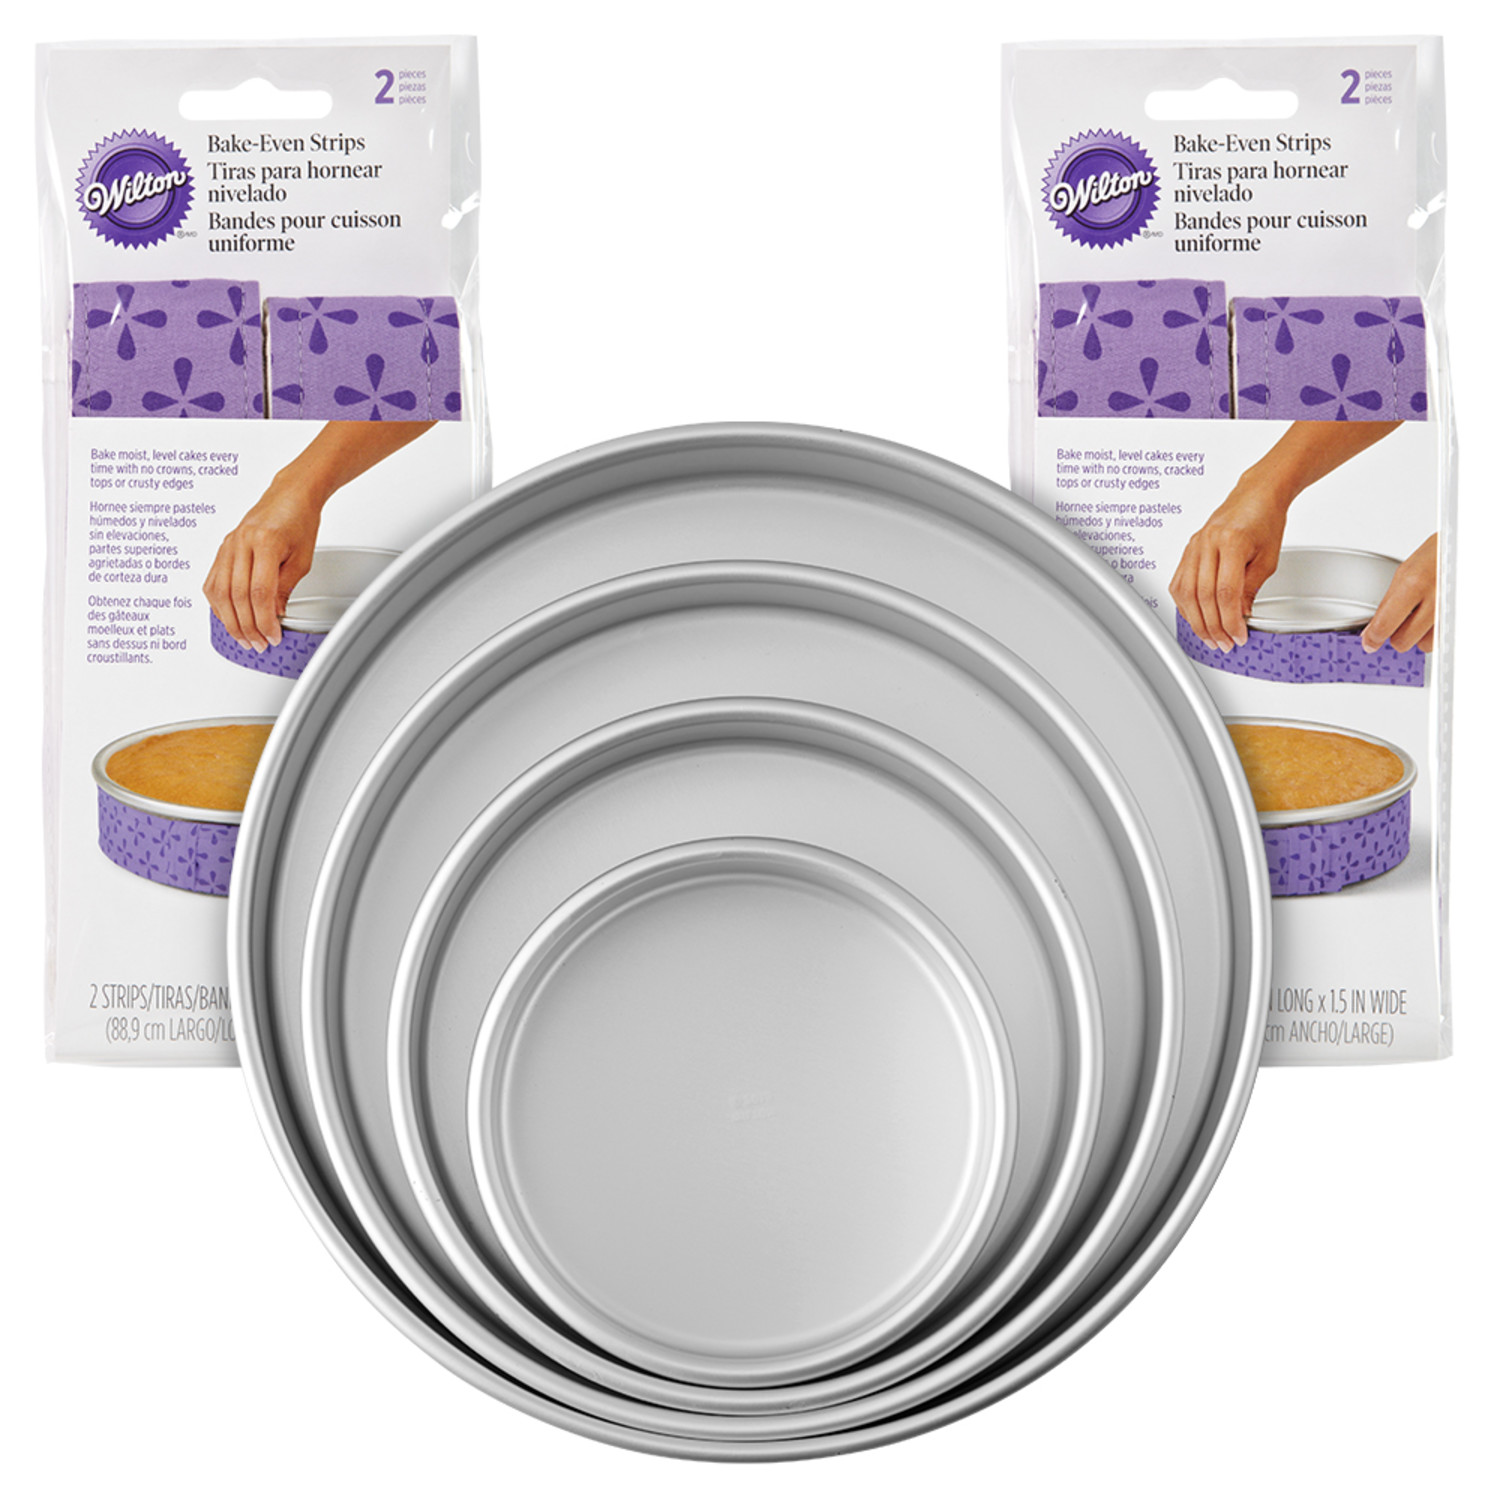 Wilton Bake-Even Cake Pan Strips - Use Cake Strips on Baking Pans for  Evenly Baked Cakes, 6-Piece Set, (2) 35 x 1.5-Inch, (2) 25 x 1.5-Inch and  (2) 10